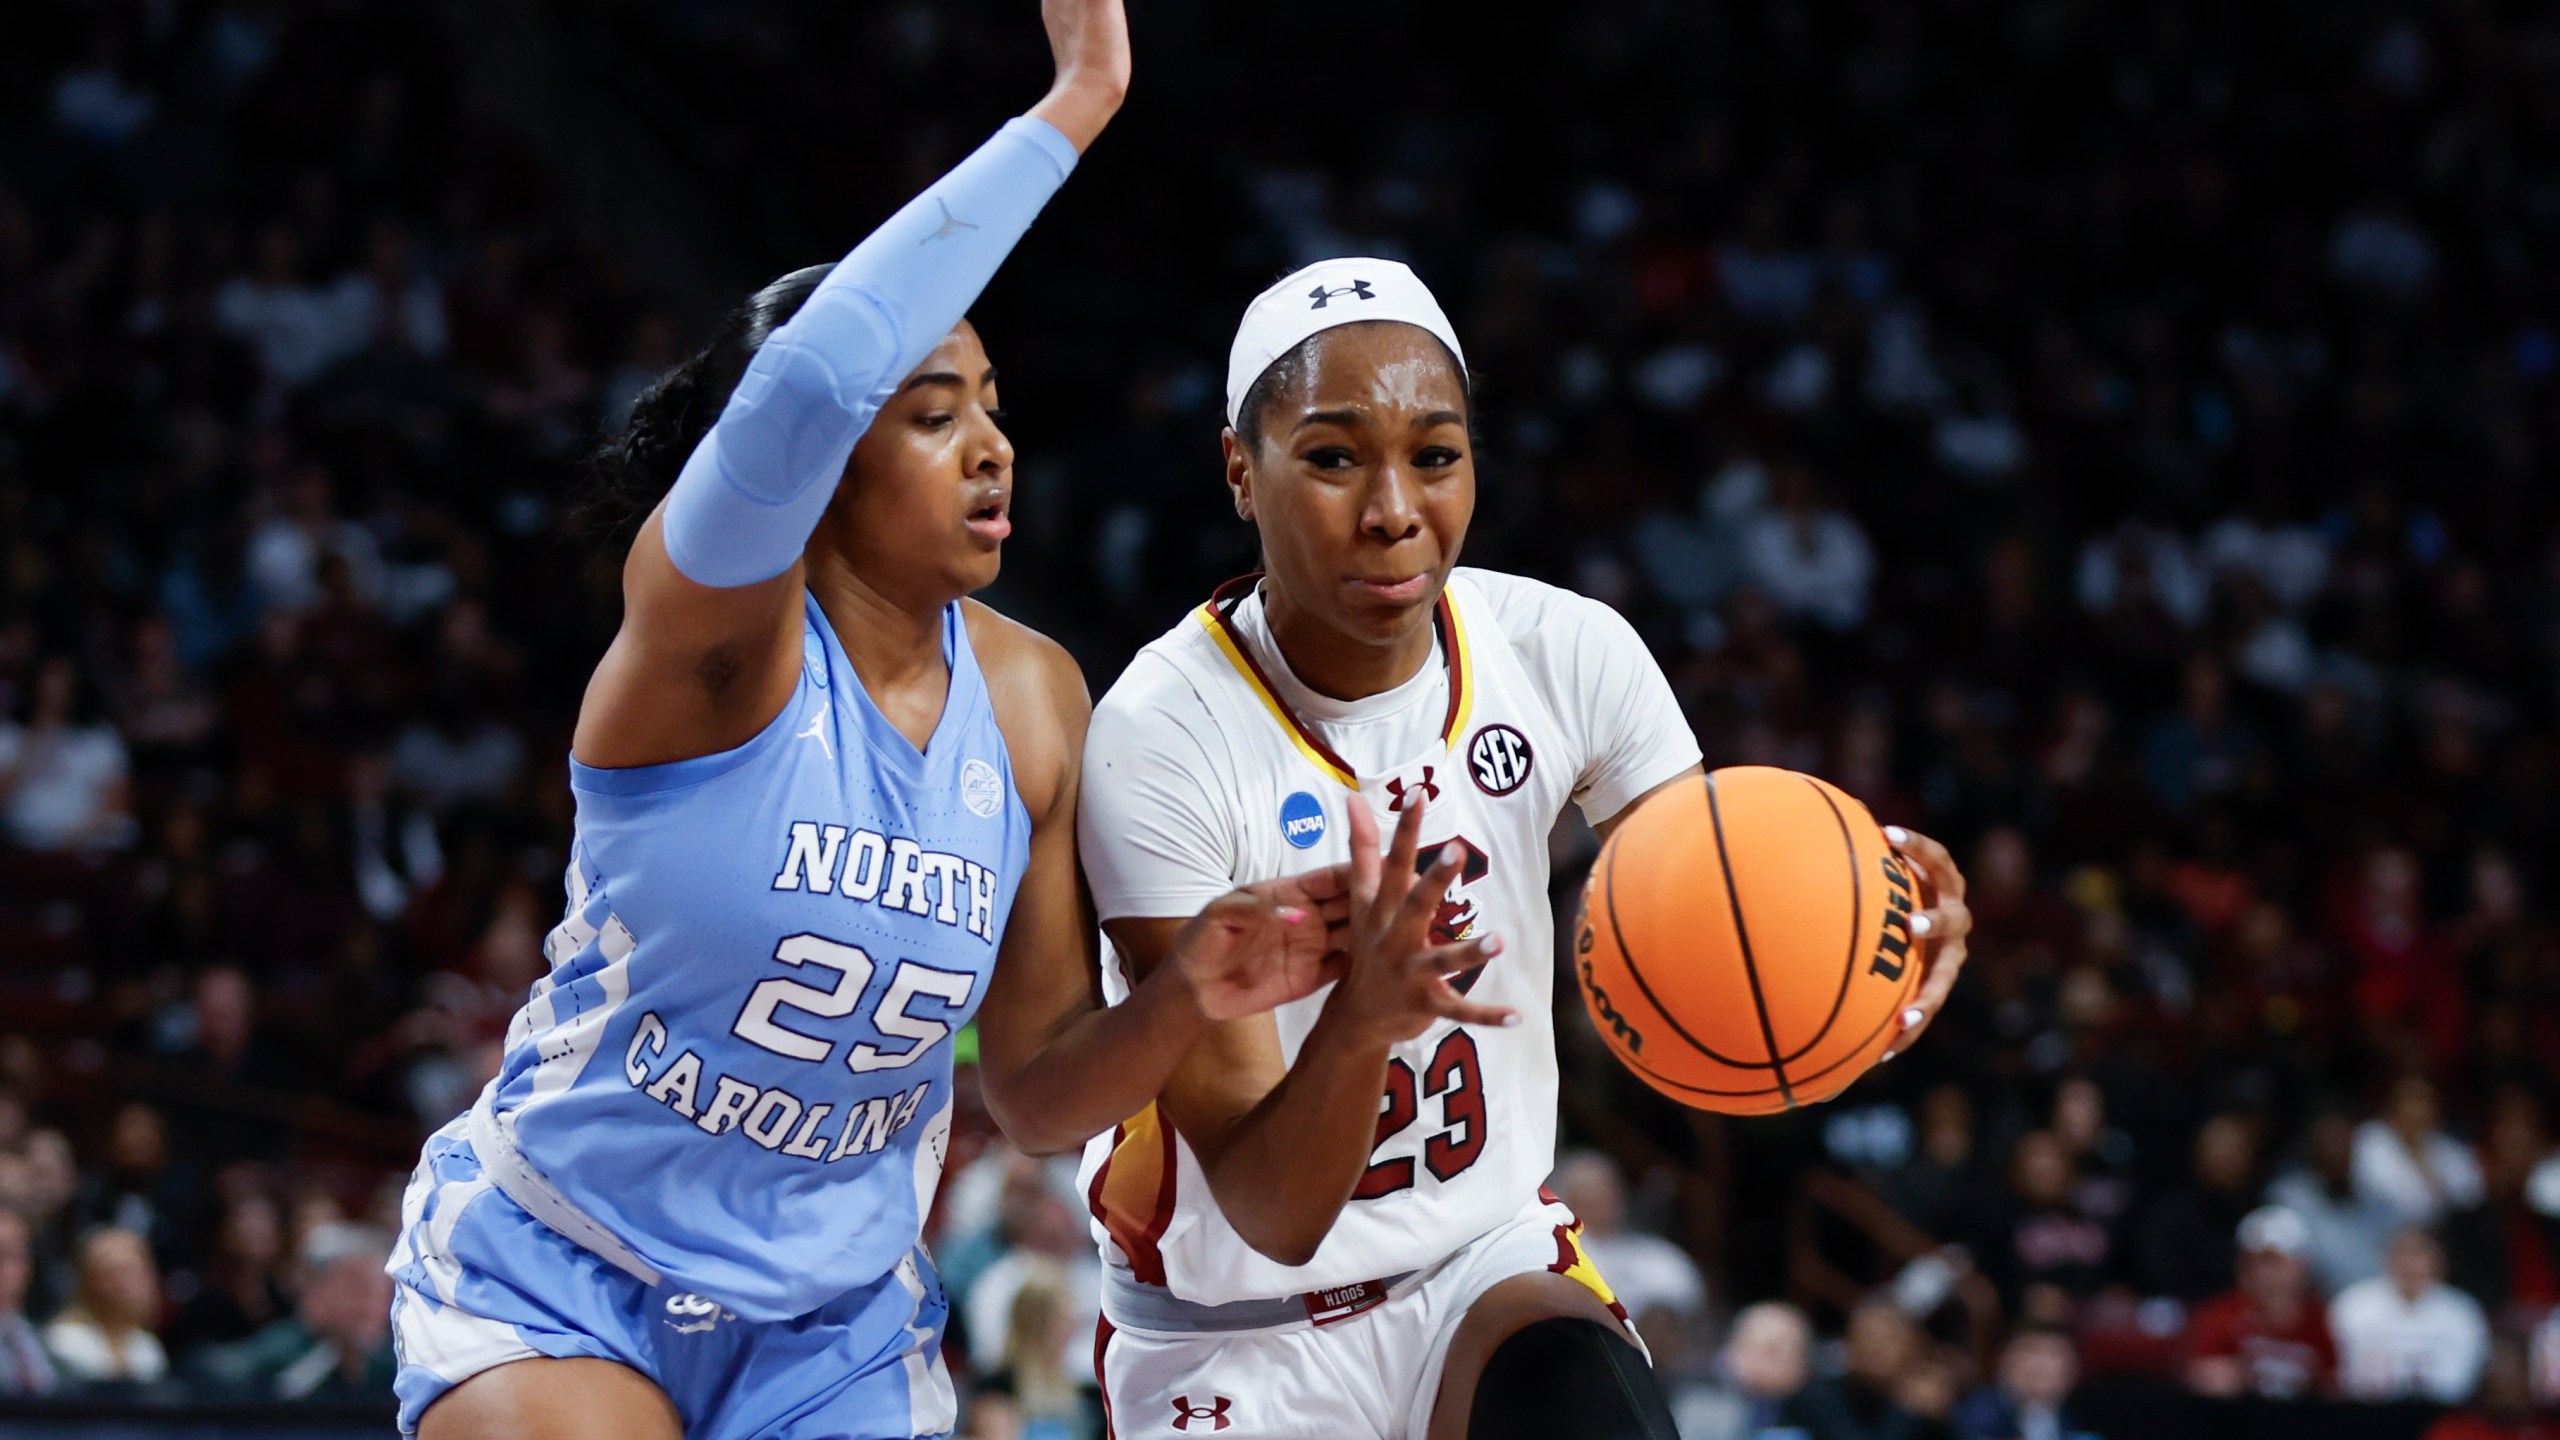 South Carolina guard Bree Hall, right, drives against North Carolina guard Deja Kelly, left, during the first half of a second-round college basketball game in the women's NCAA Tournament in Columbia, S.C., Sunday, March 24, 2024. (AP Photo/Nell Redmond)